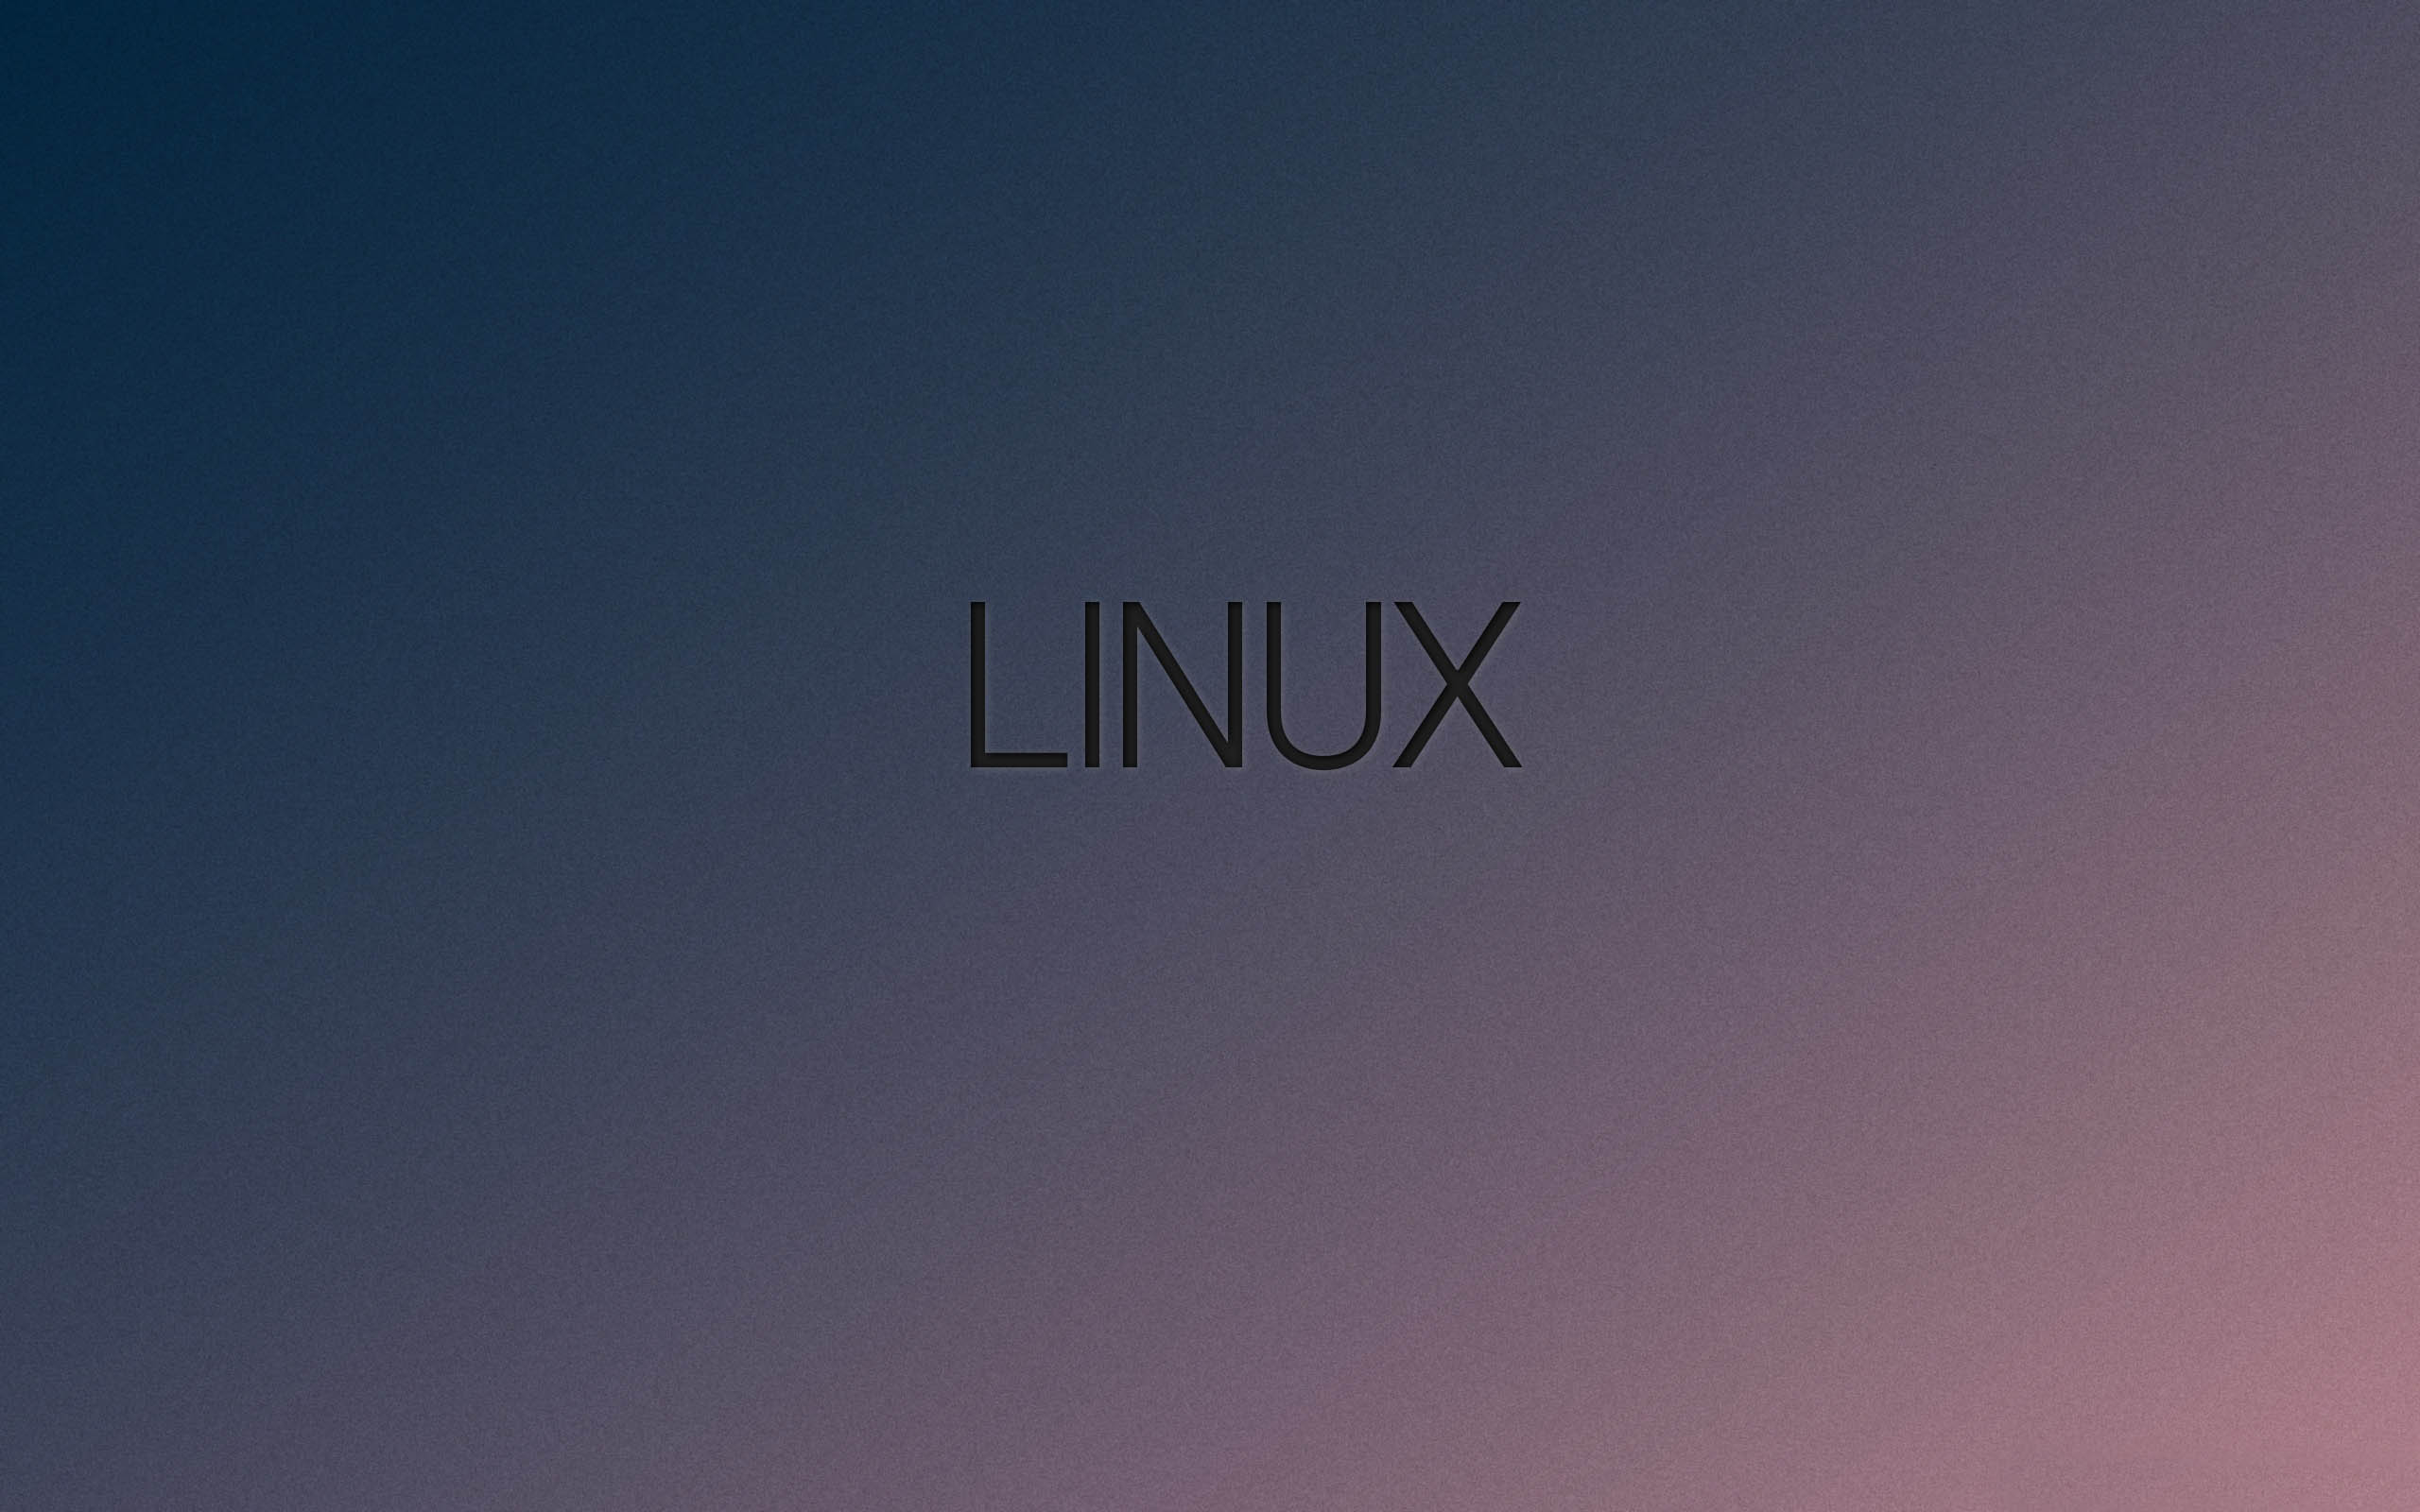 Linux Backgrounds   Linux wallpapers for your PC desktop